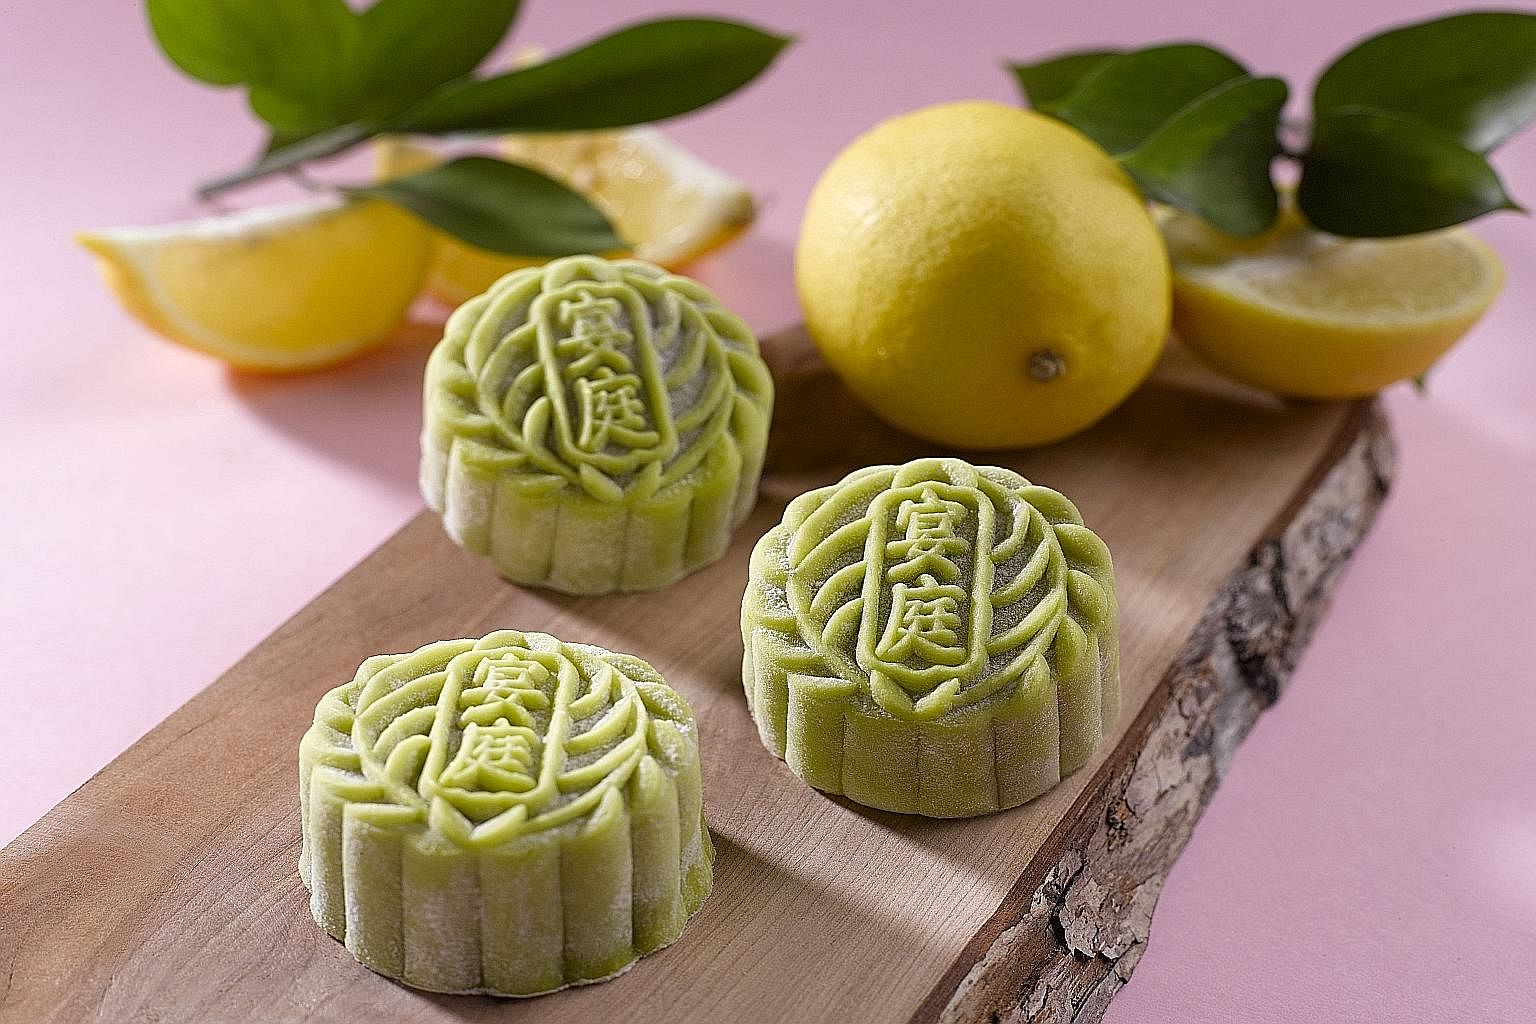 Snowskin mooncakes like these are healthier than the Teochew-style flaky crust ones.